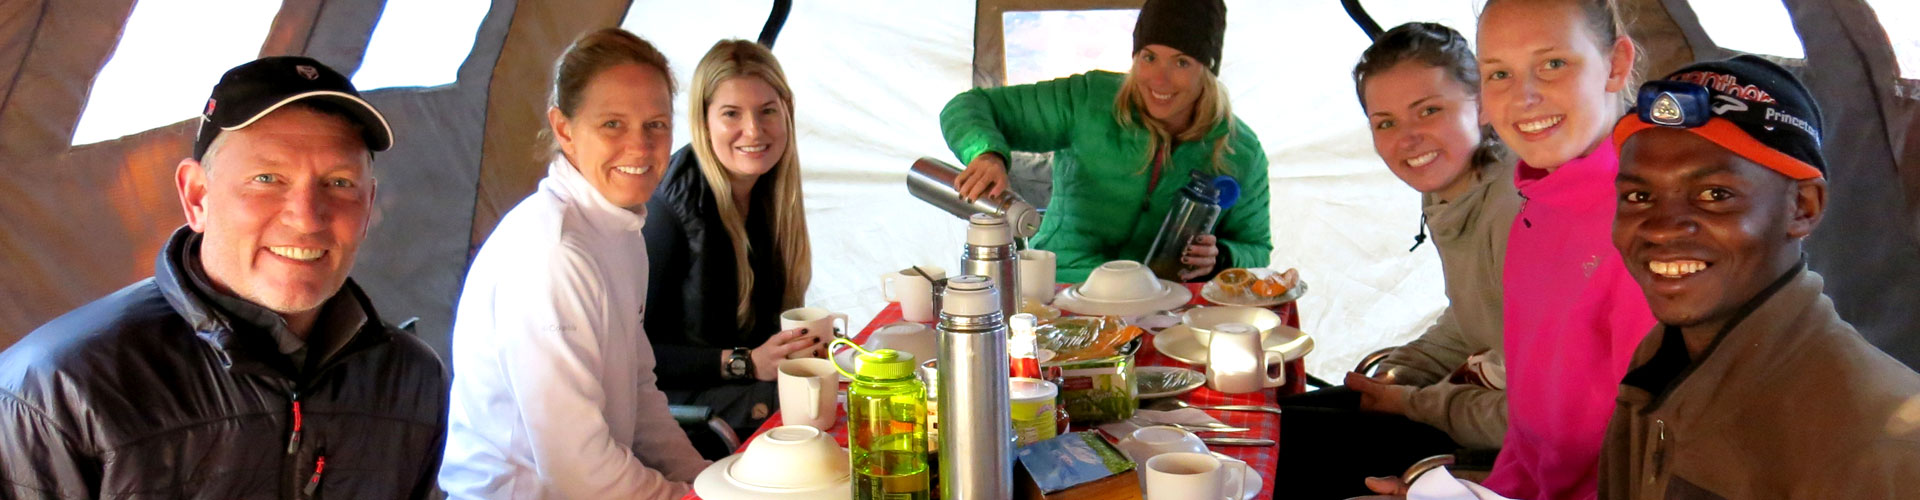 Climbers enjoying a meal together in the dining tent